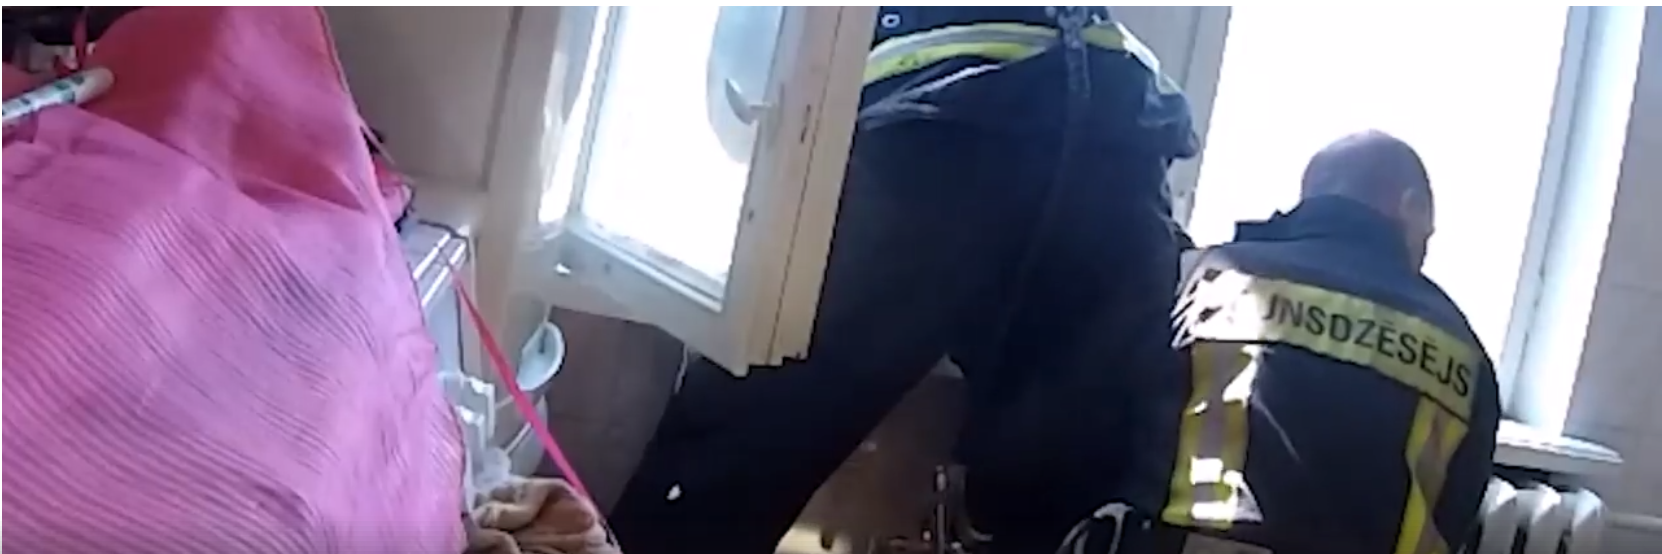 Latvia Firefighter Catches Falling Man from Window